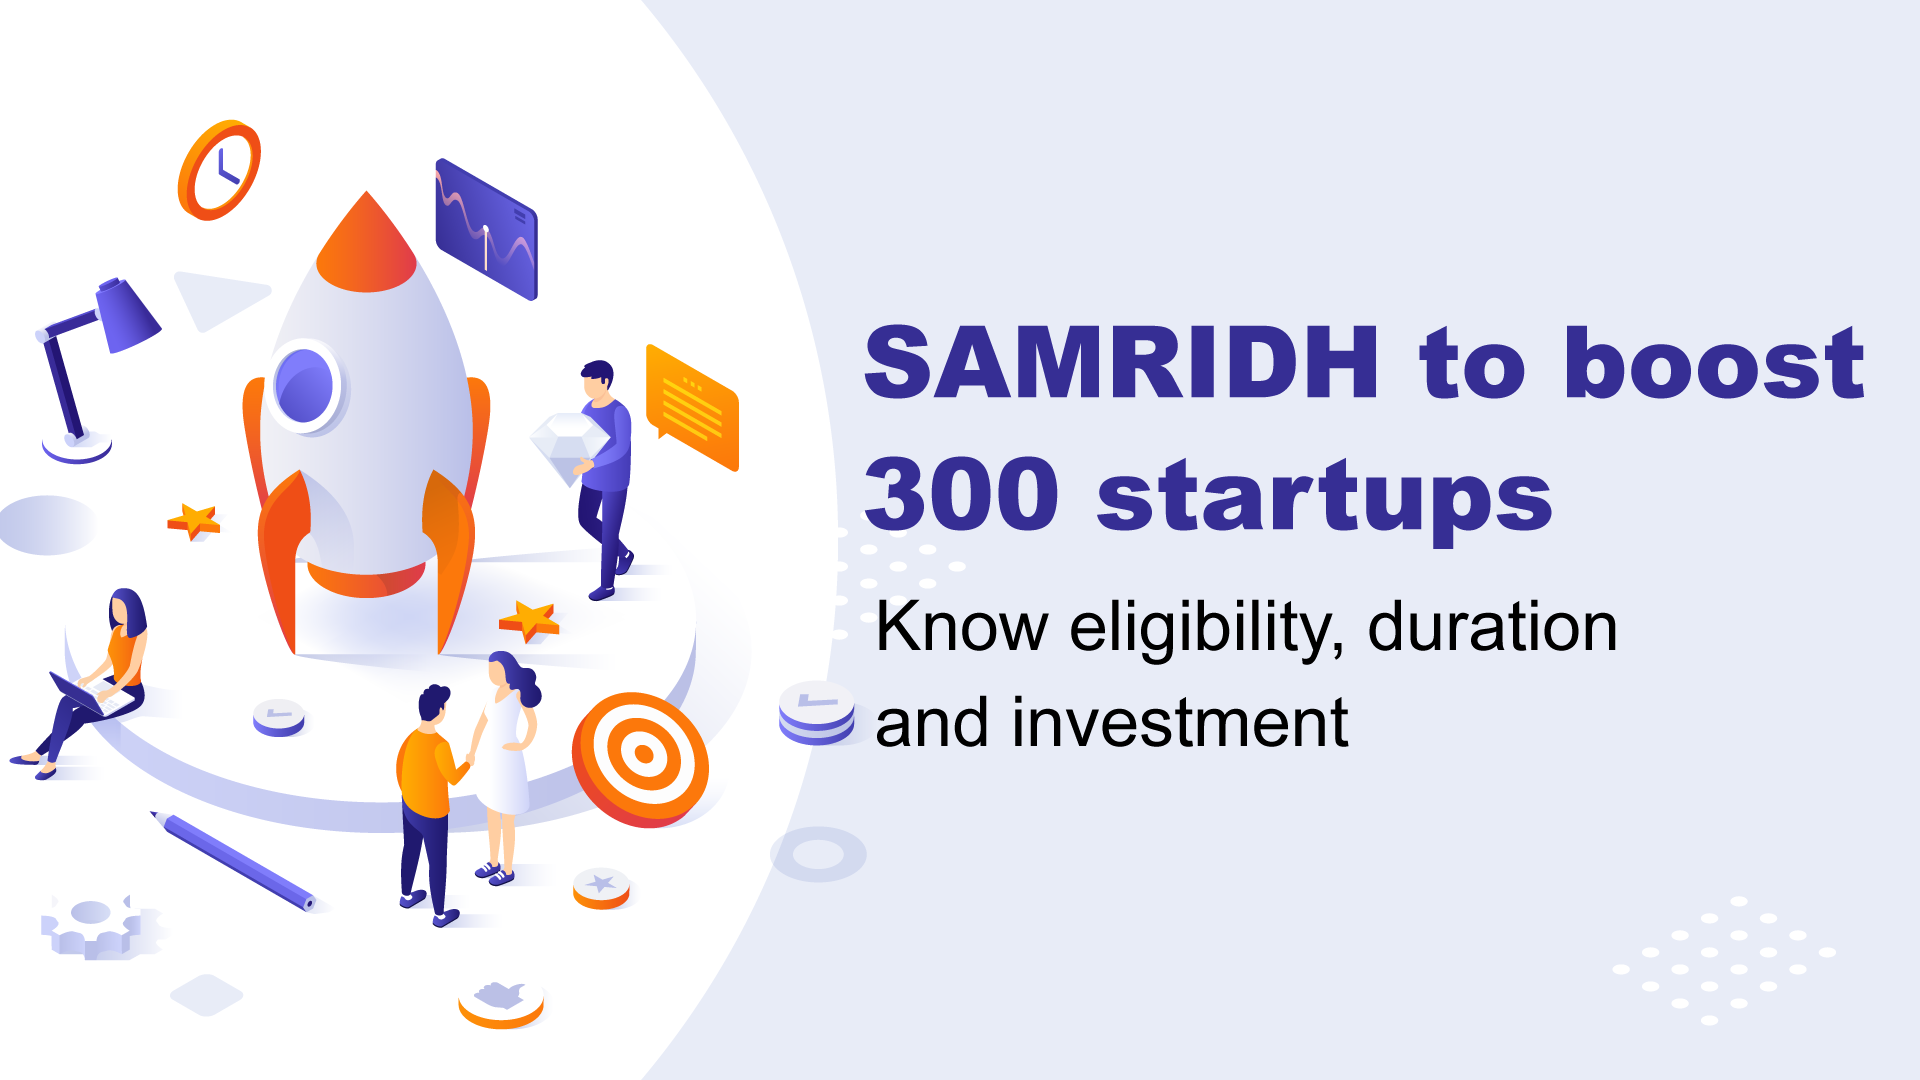 MeitY launches SAMRIDH to help grow 300 startups as India targets 100 unicorns